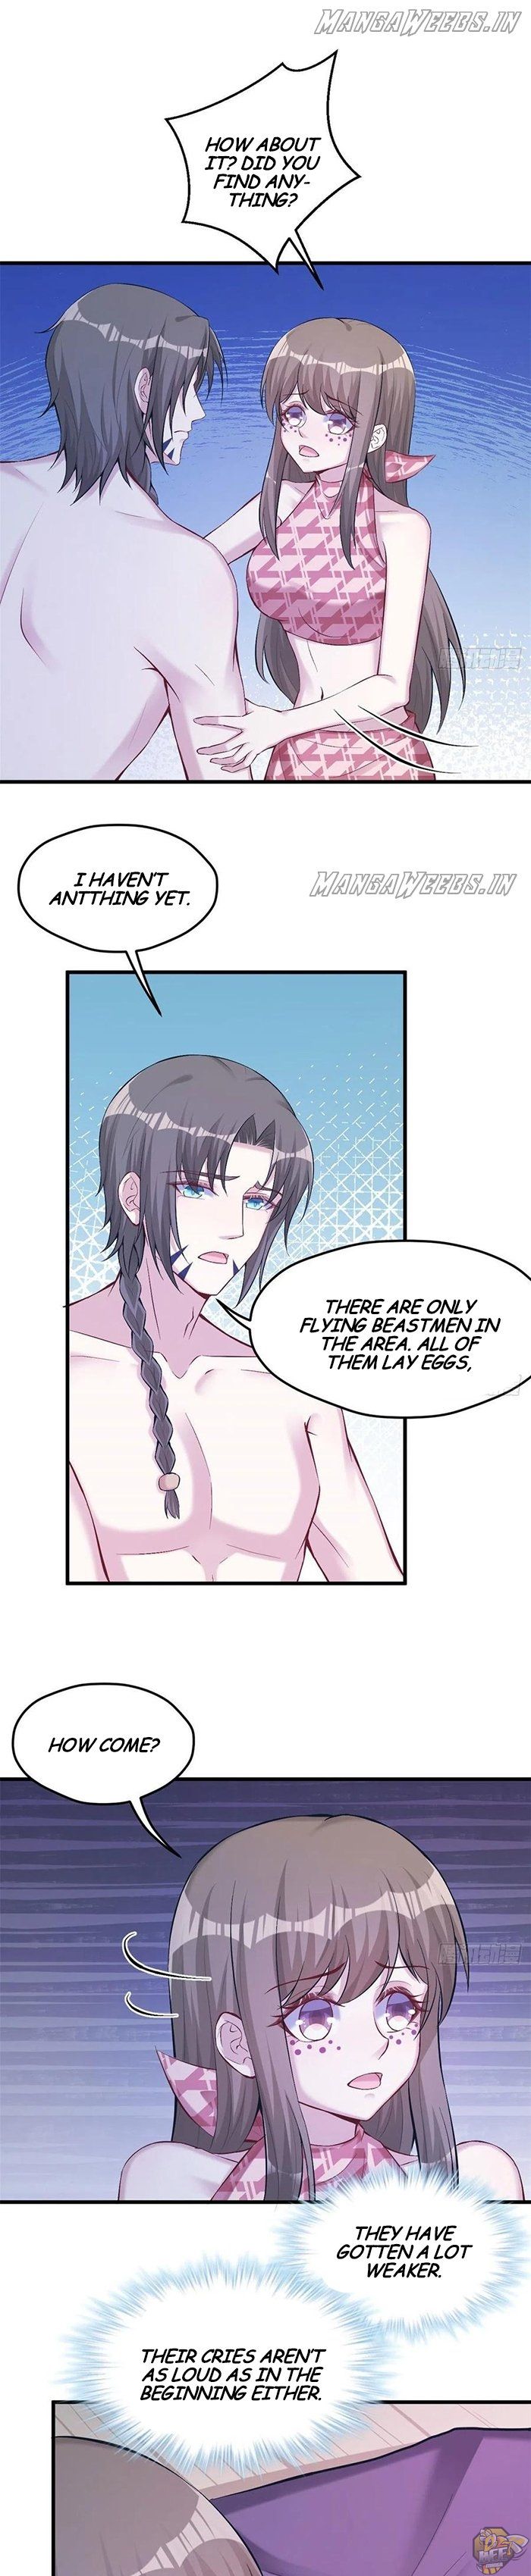 Beauty and the Beasts Chap 204